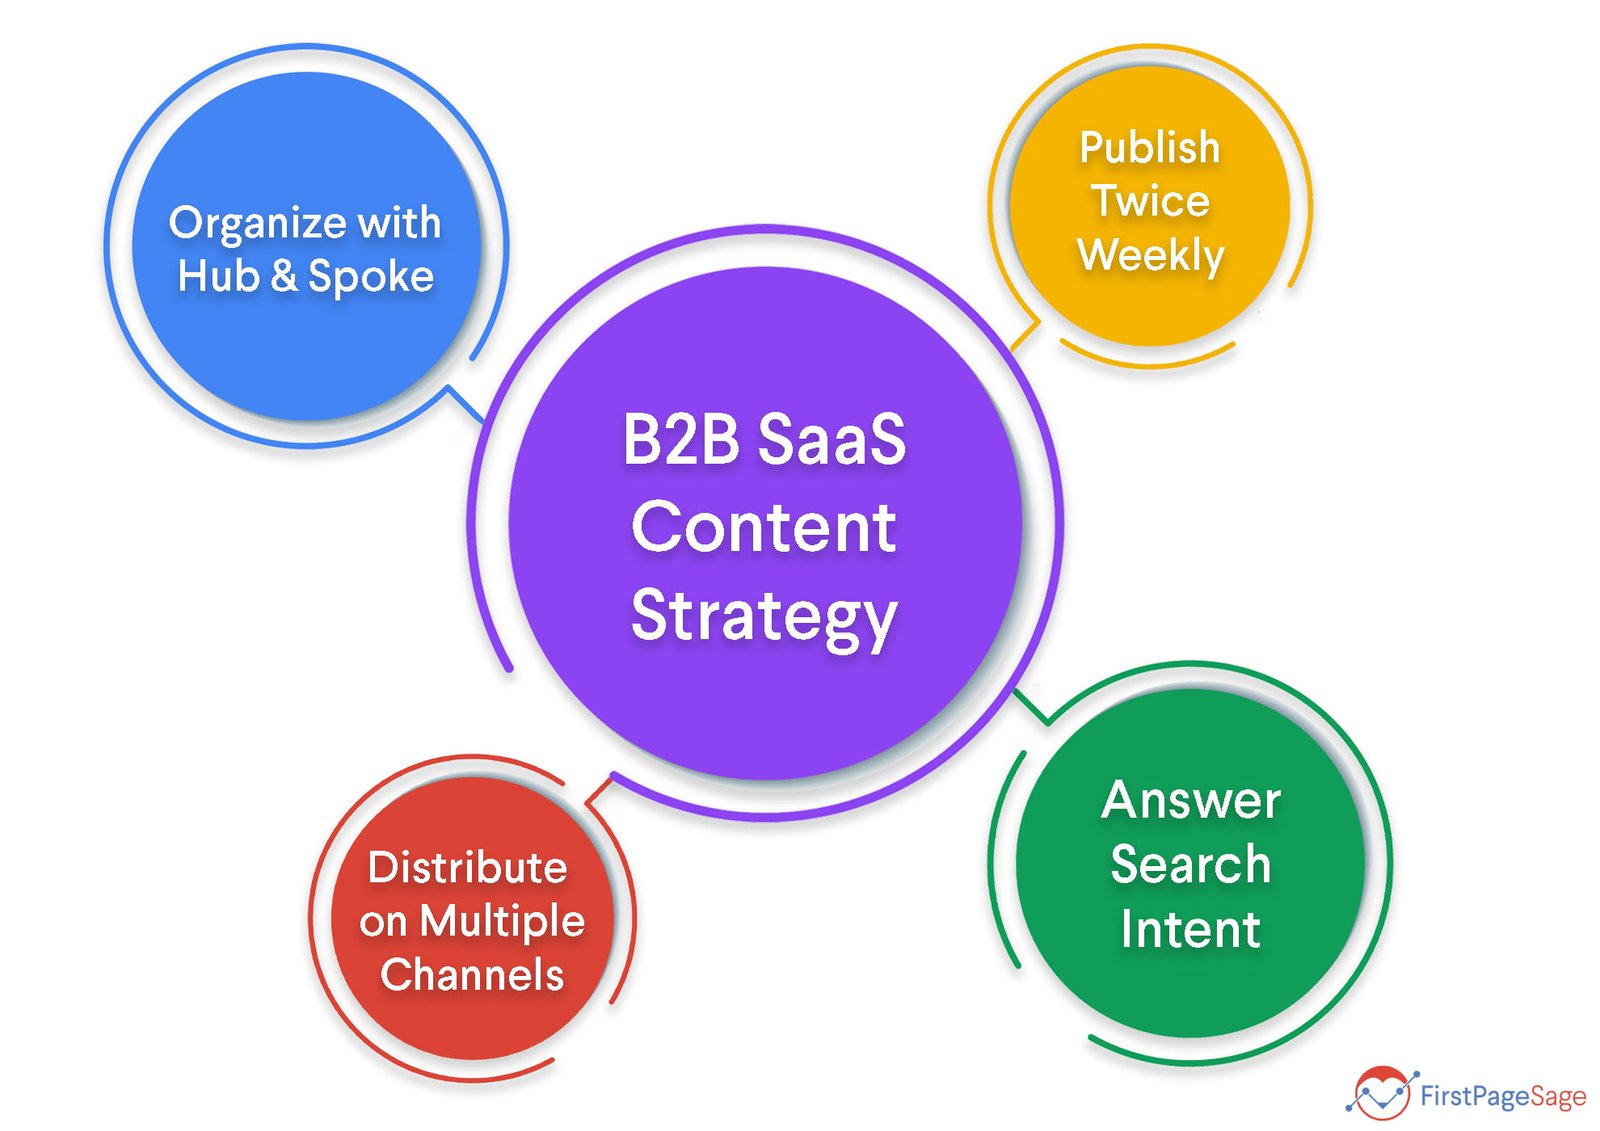 Content Marketing for B2B SaaS